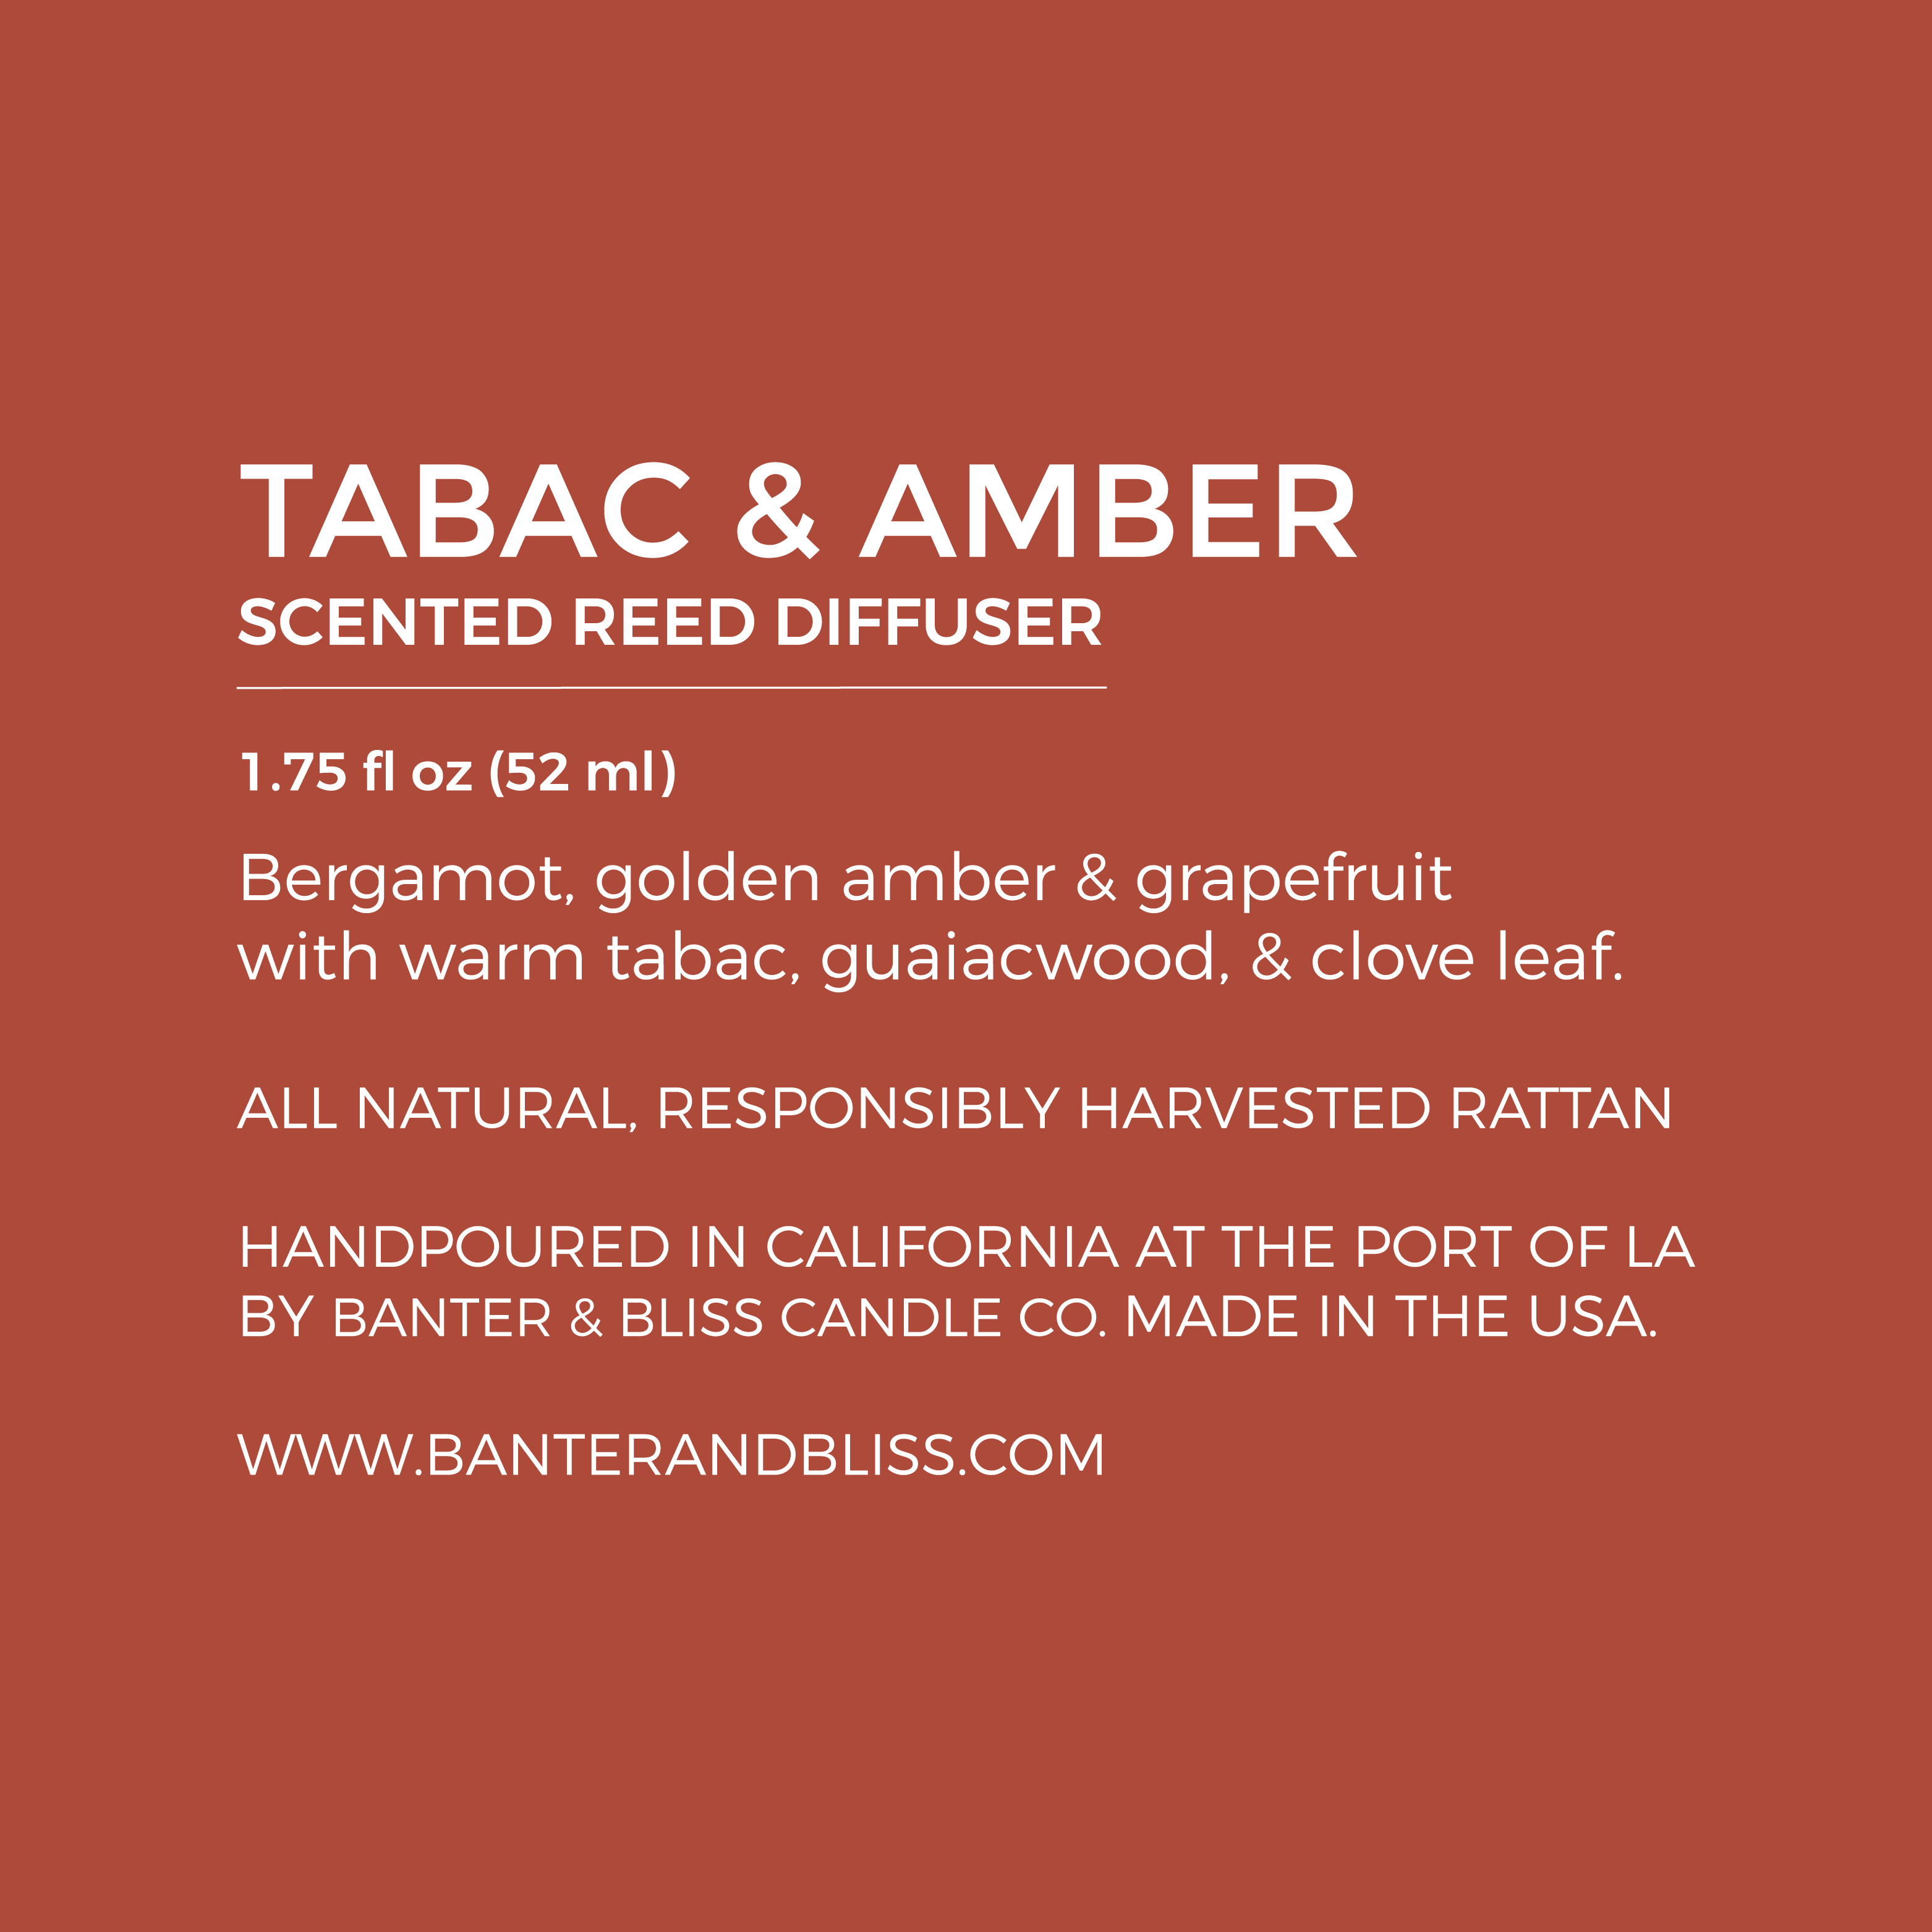 Tabac & Amber. Scented Reed Diffuser.